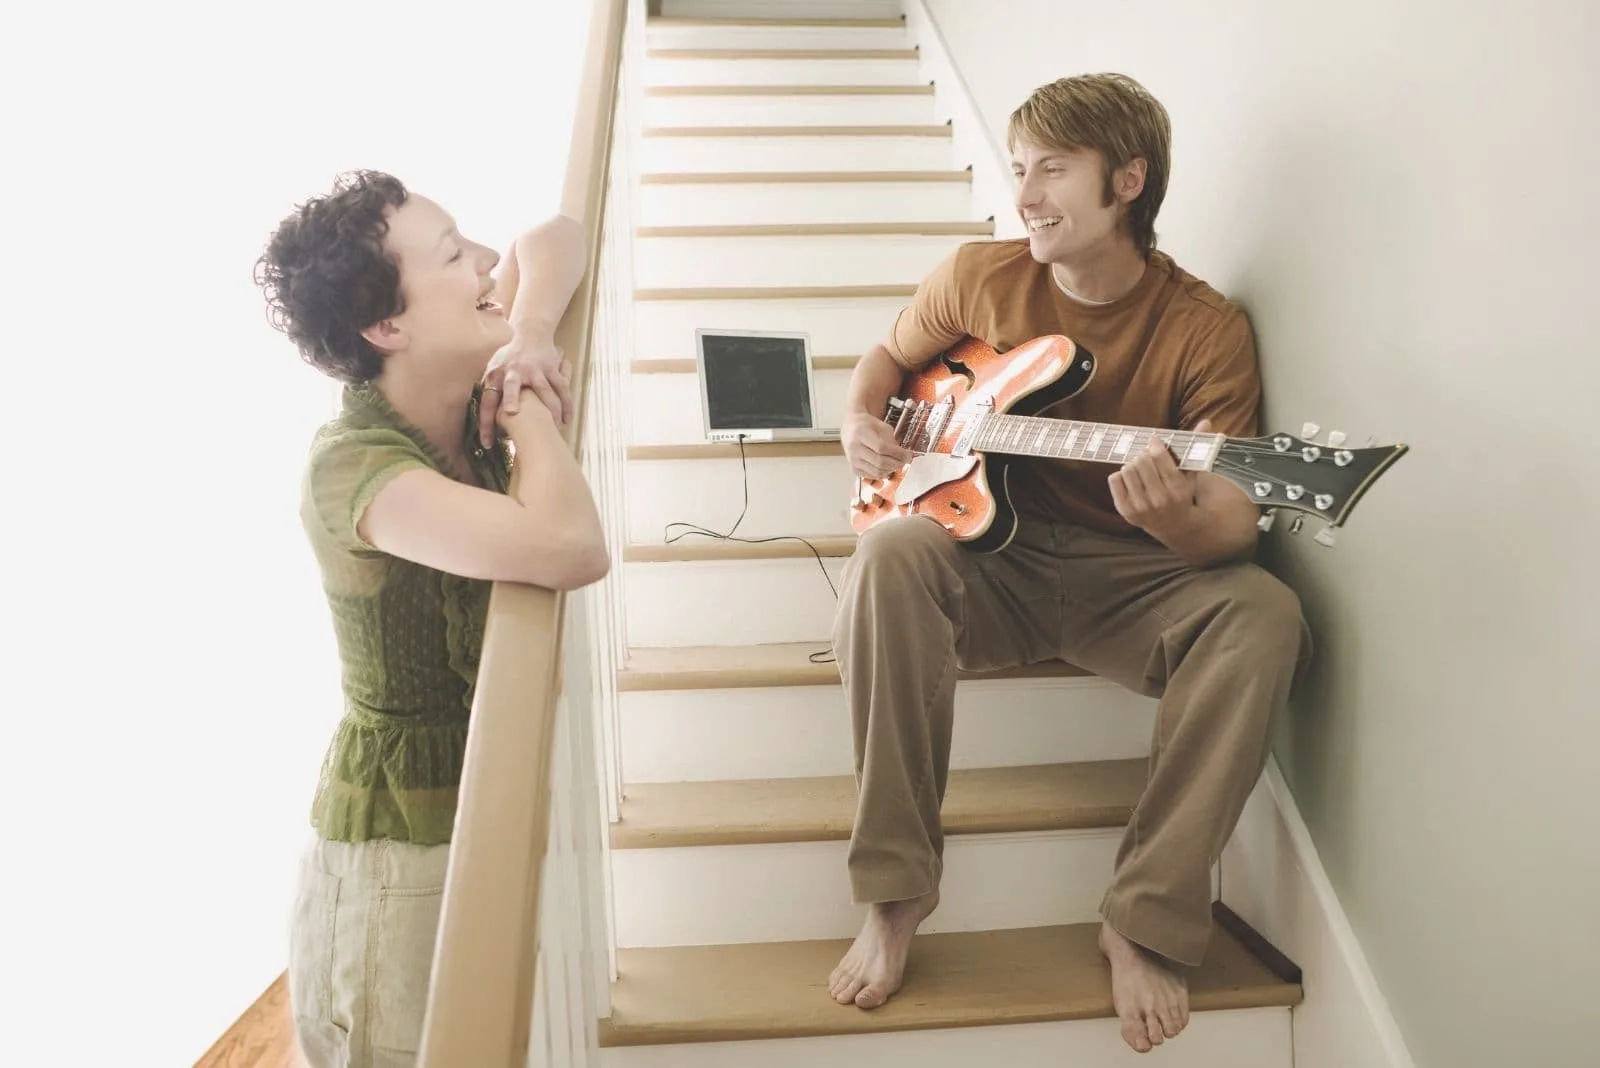 man playing guitar and sitting in the stairs while talking to the woman laughing